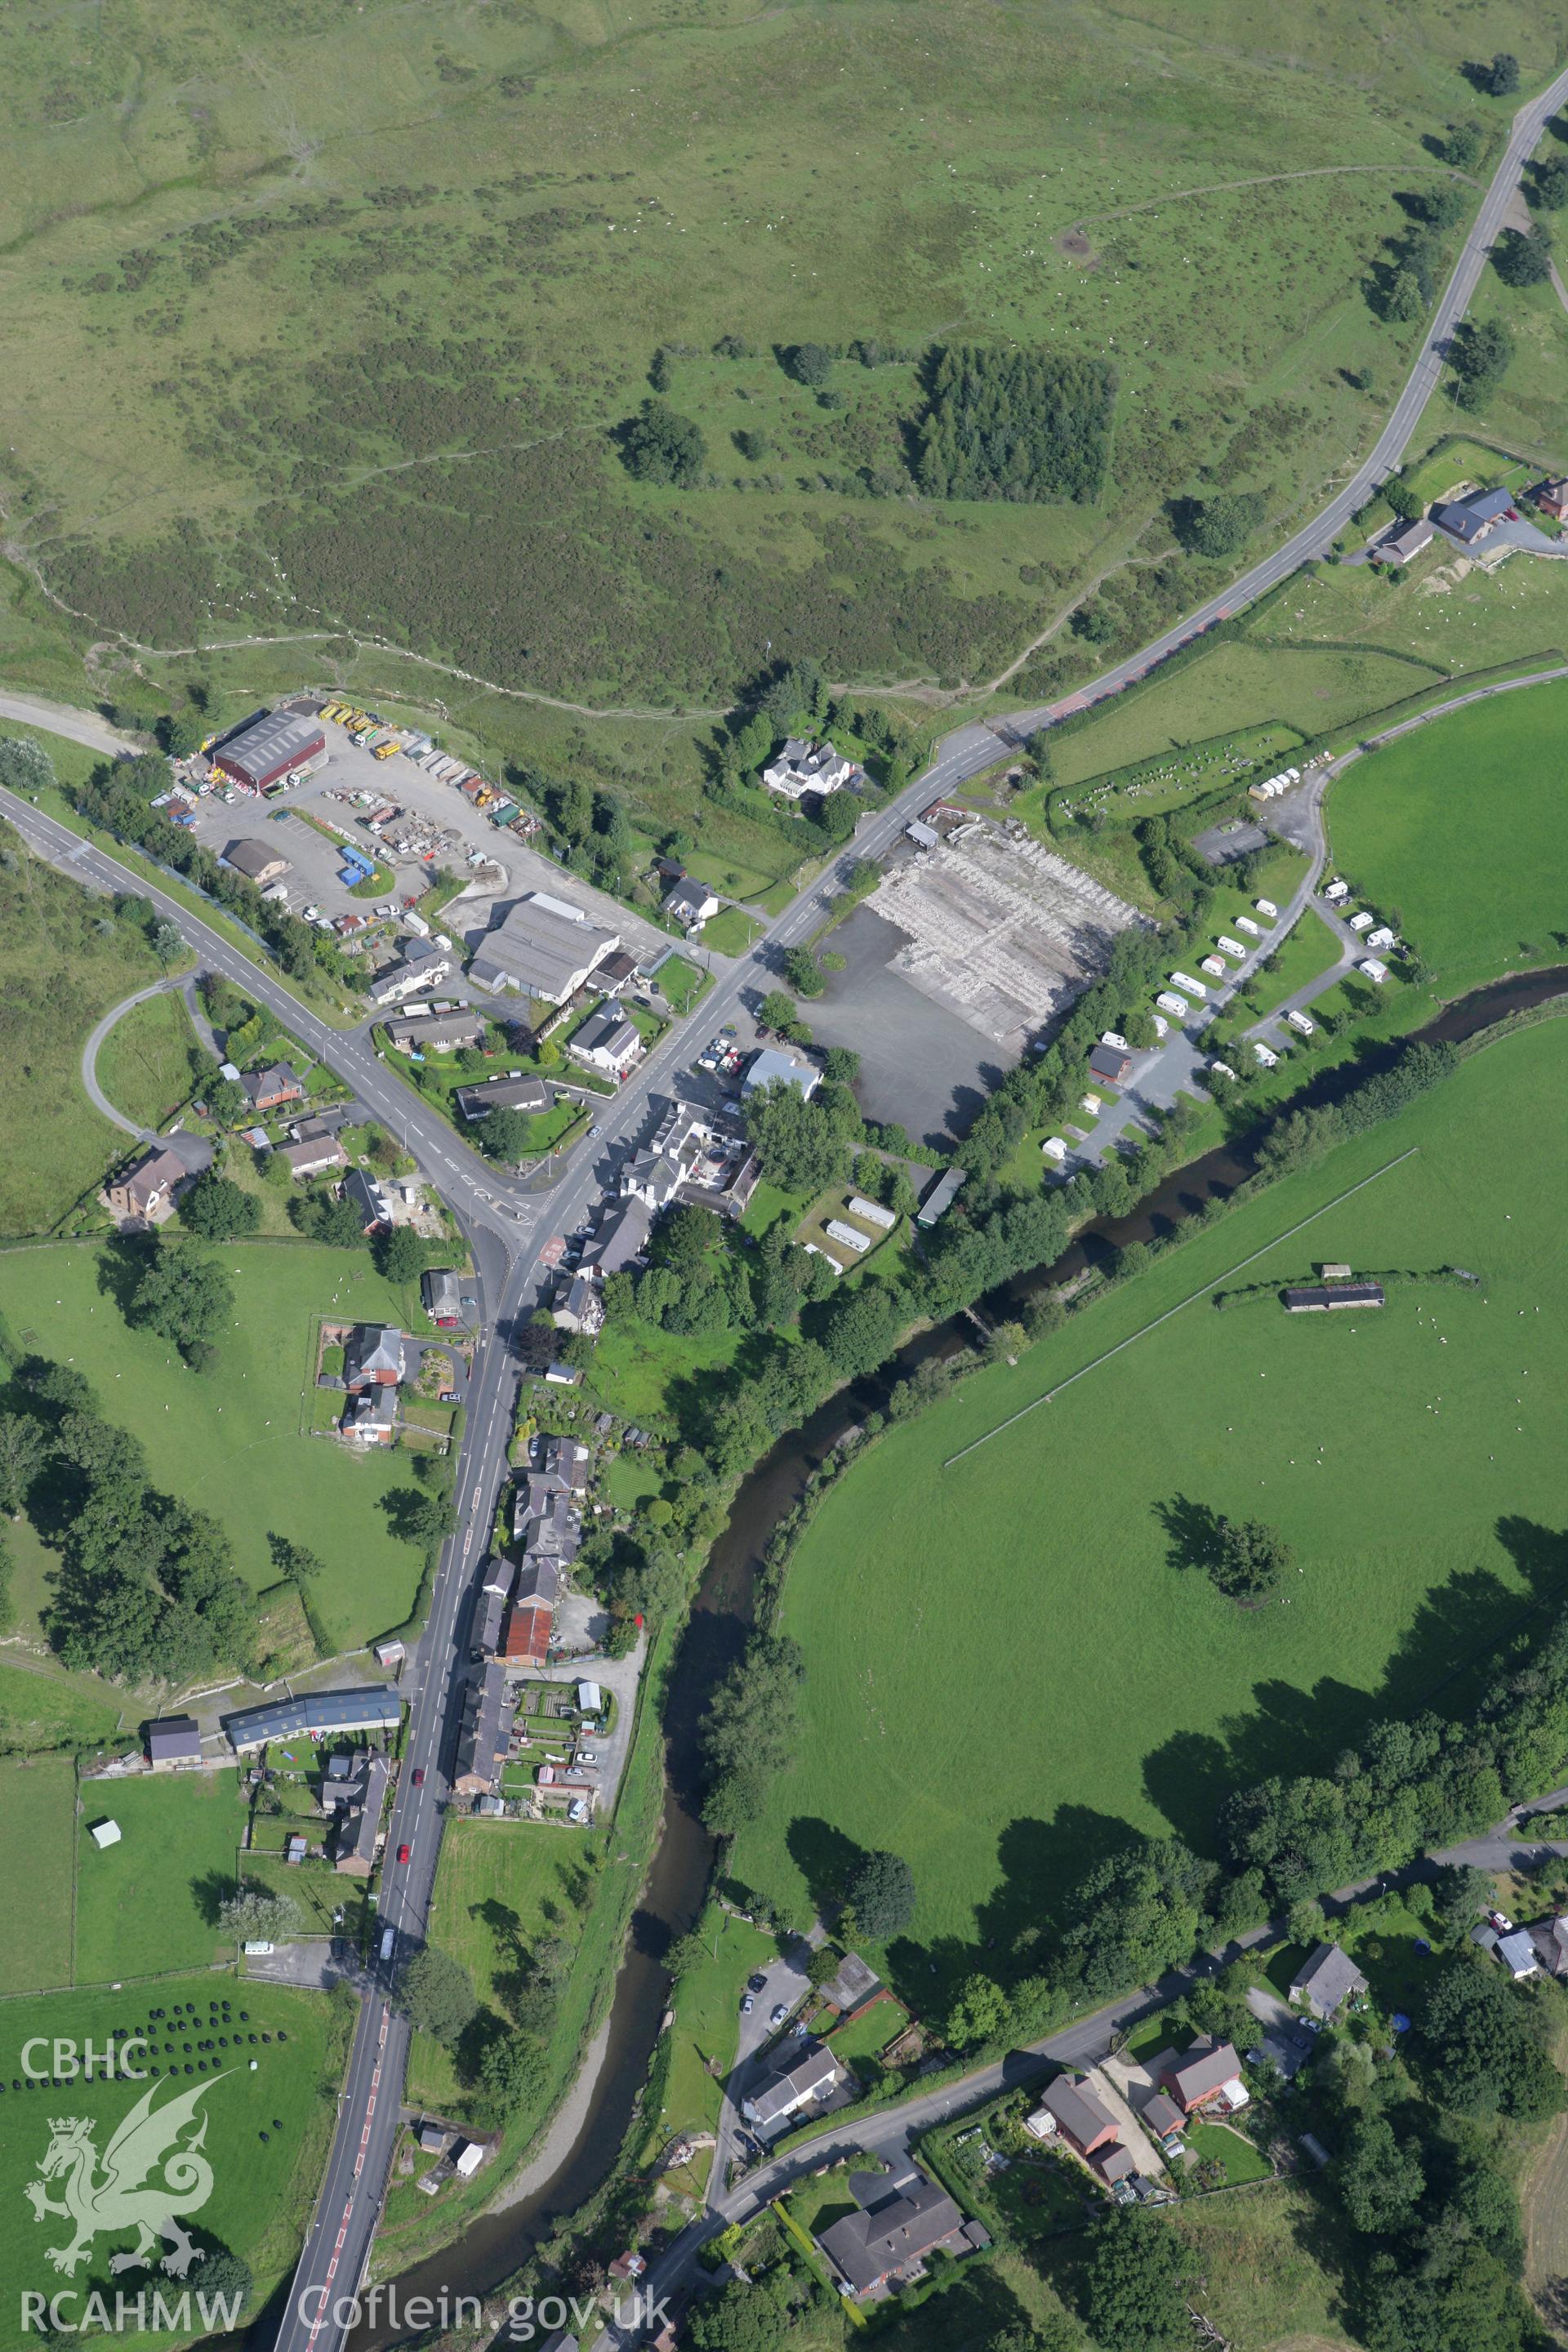 RCAHMW colour oblique aerial photograph of Penybont Village. Taken on 08 August 2007 by Toby Driver